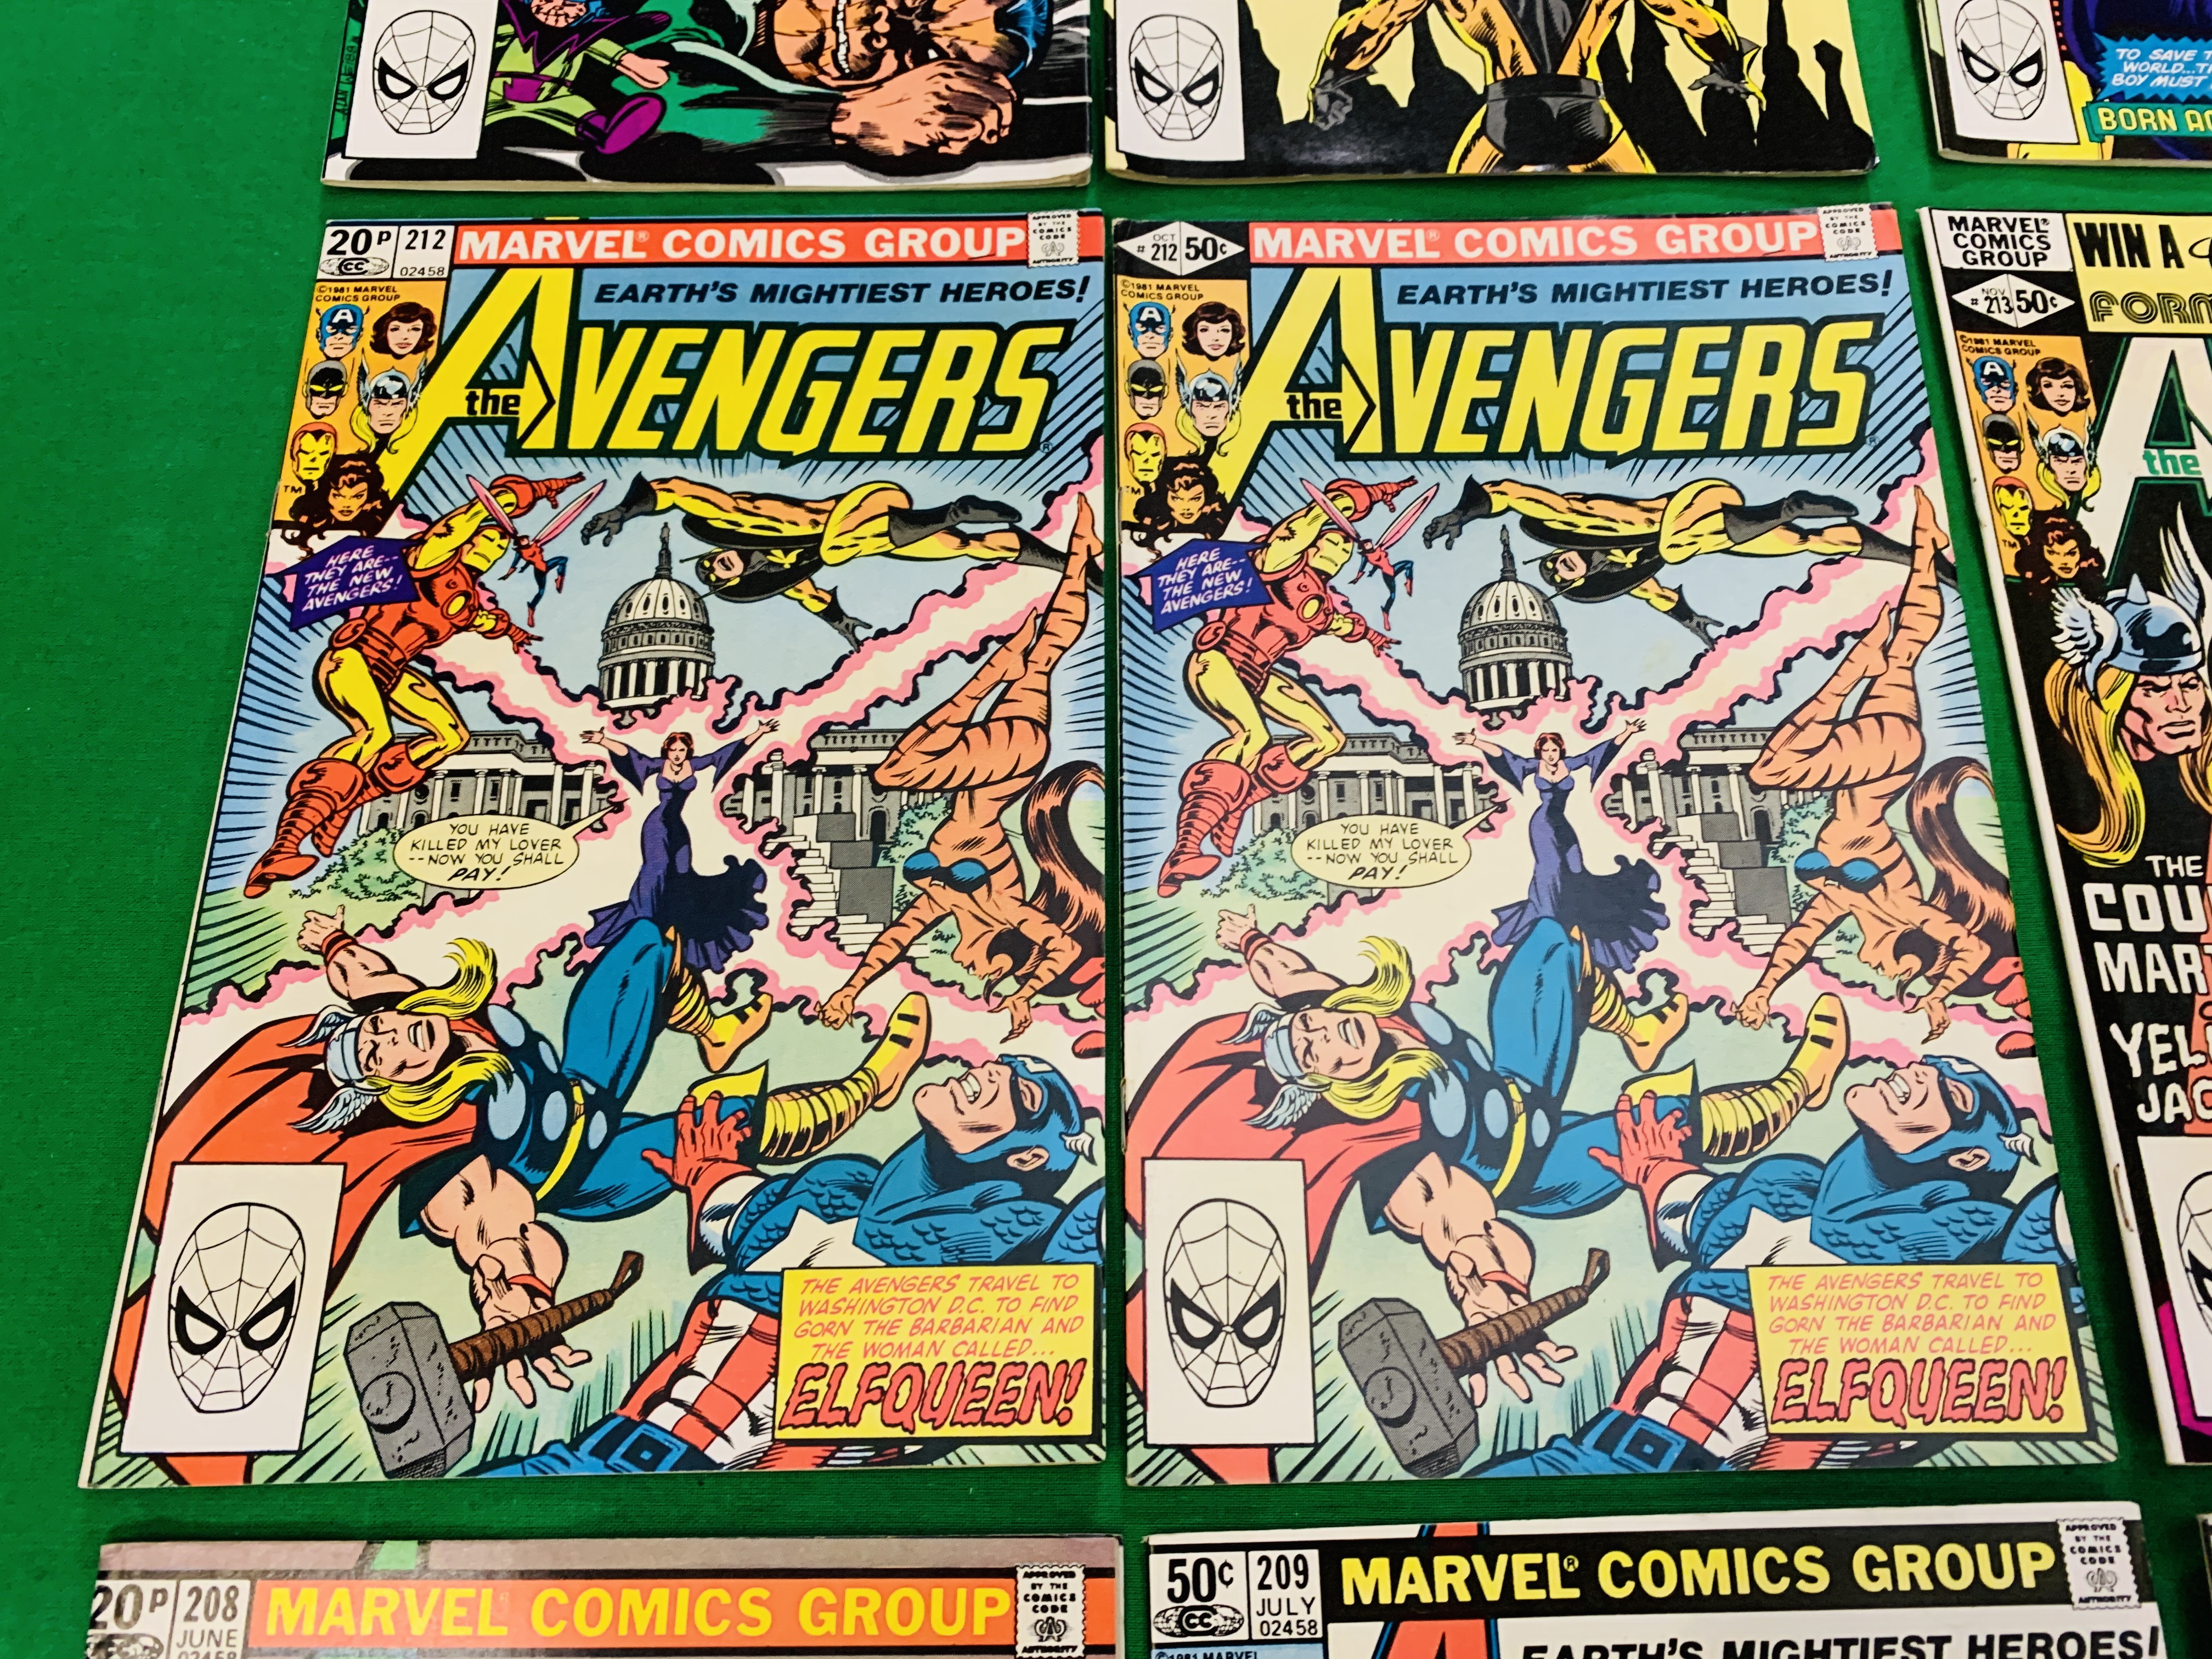 MARVEL COMICS THE AVENGERS NO. 101 - 299, MISSING ISSUES 103 AND 110. - Image 83 of 130